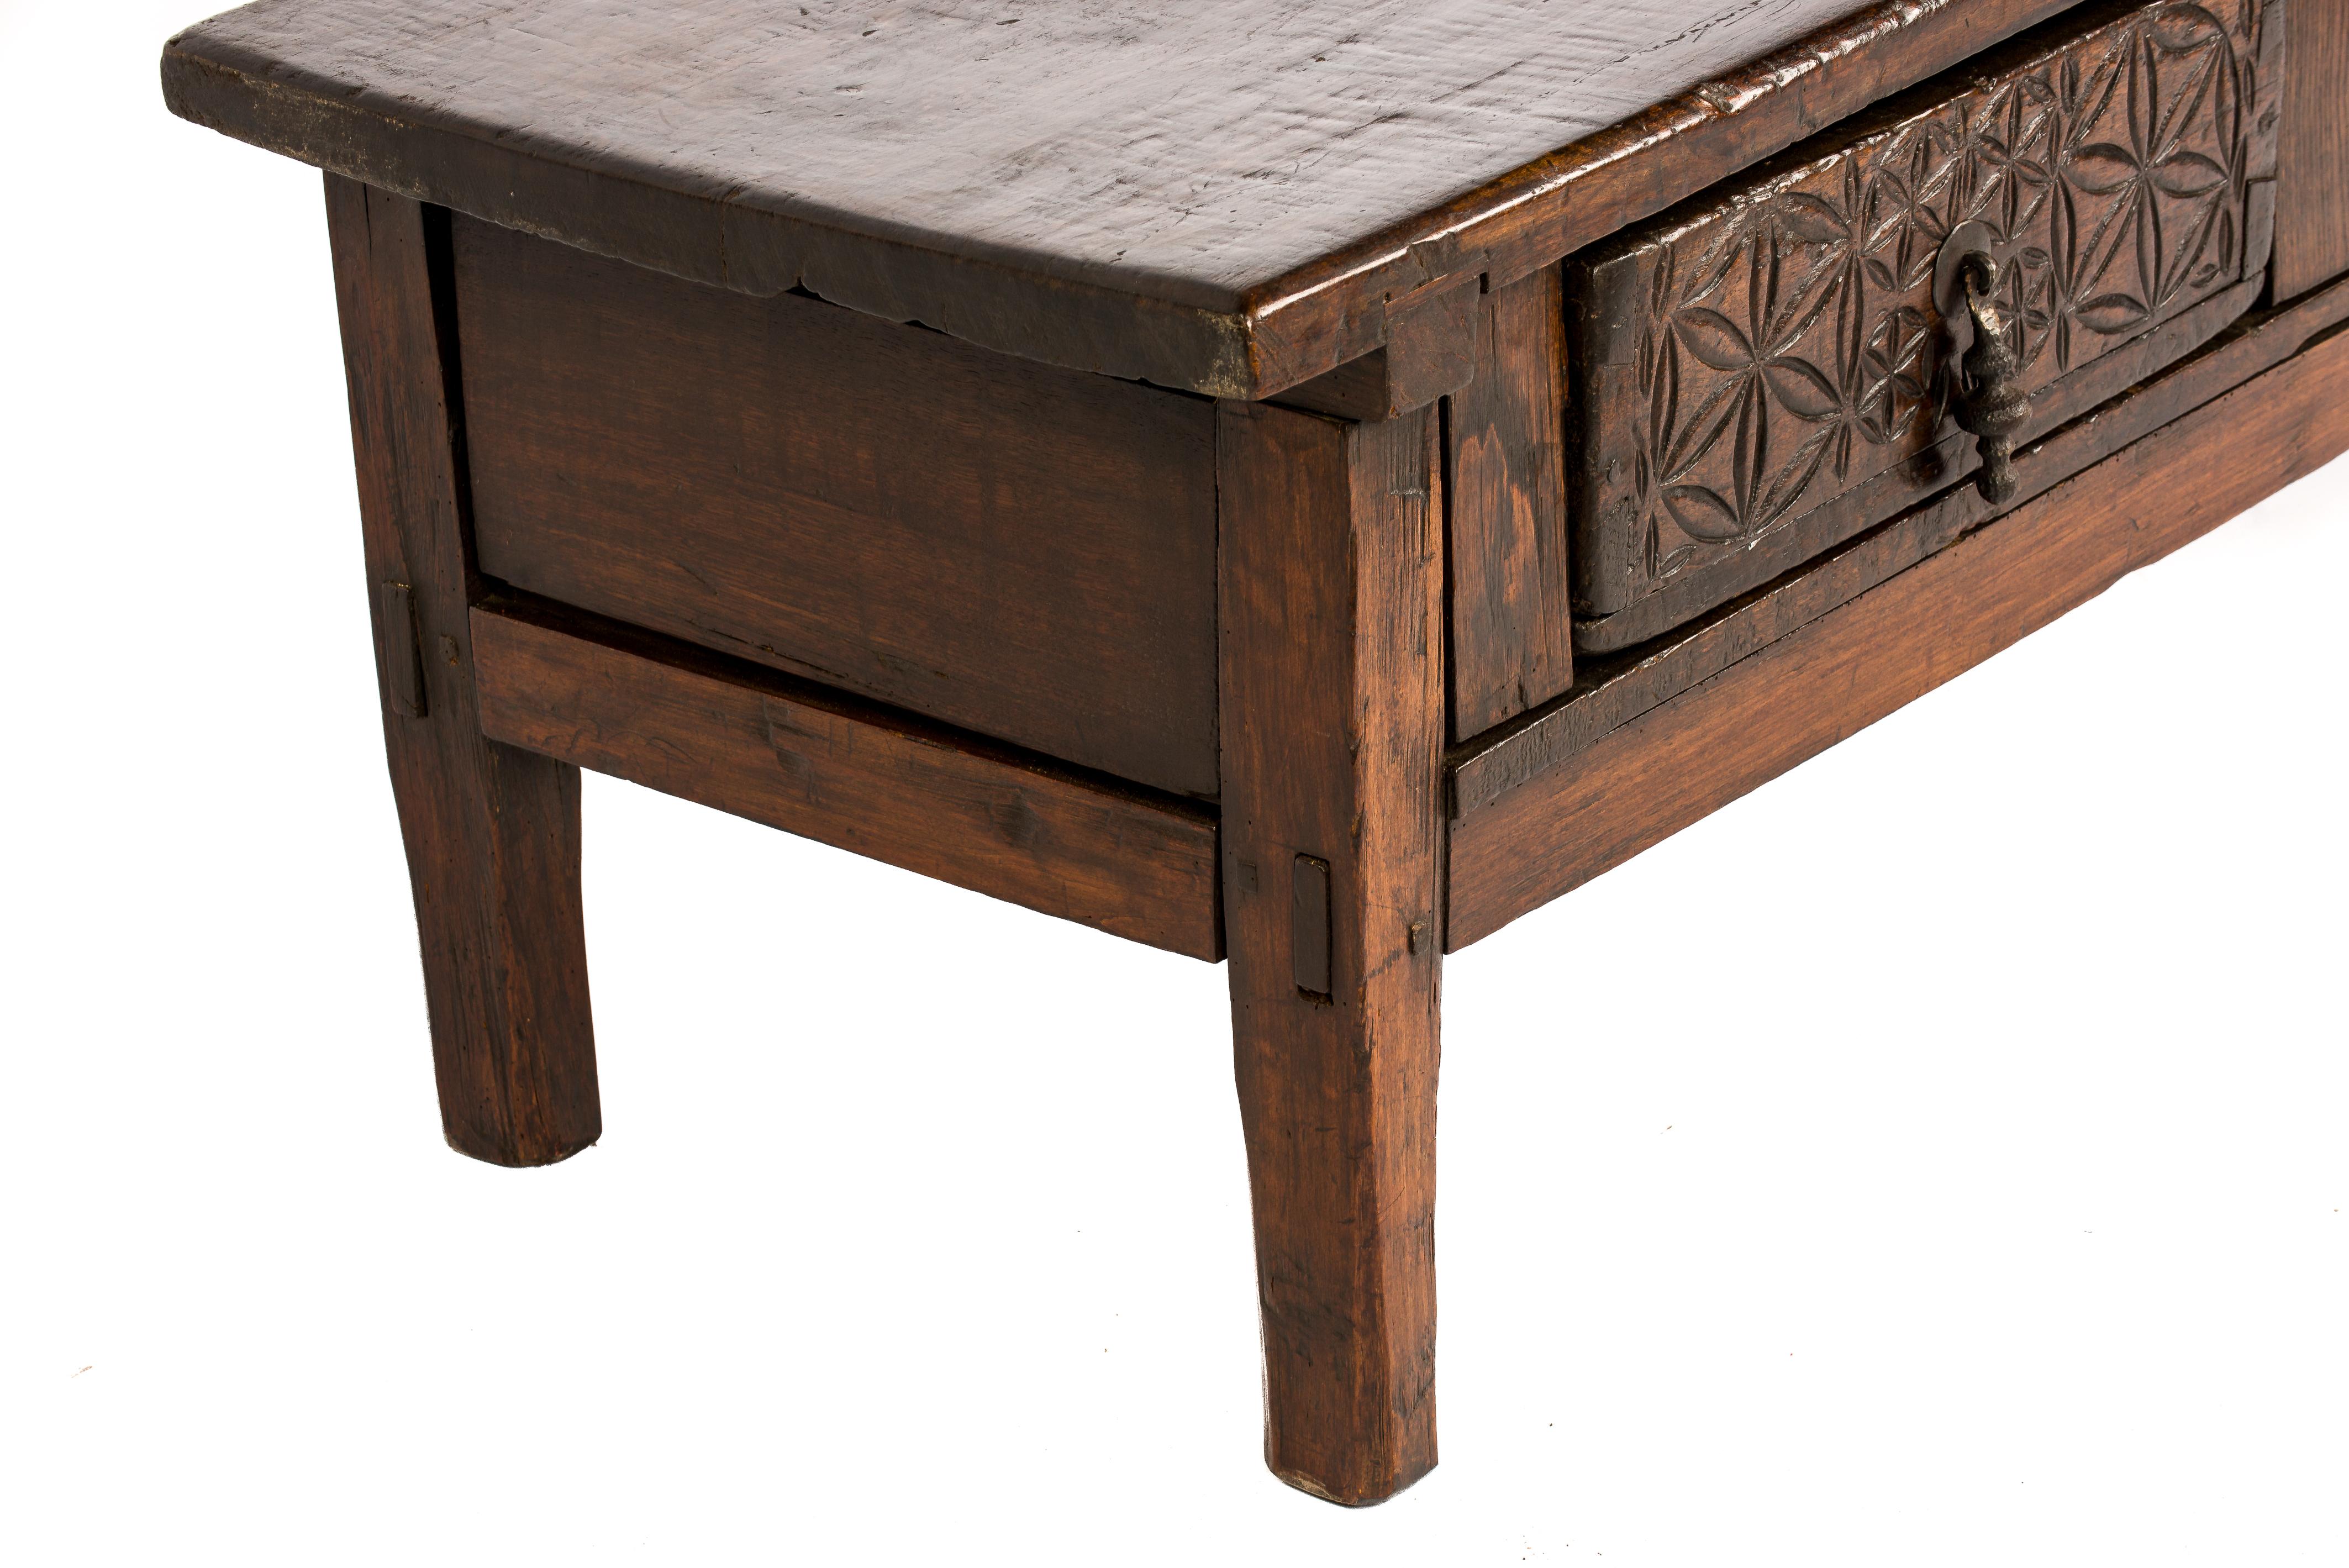 Antique 18th-Century Rustic Spanish Chestnut Coffee Table with Geometric Carving 3